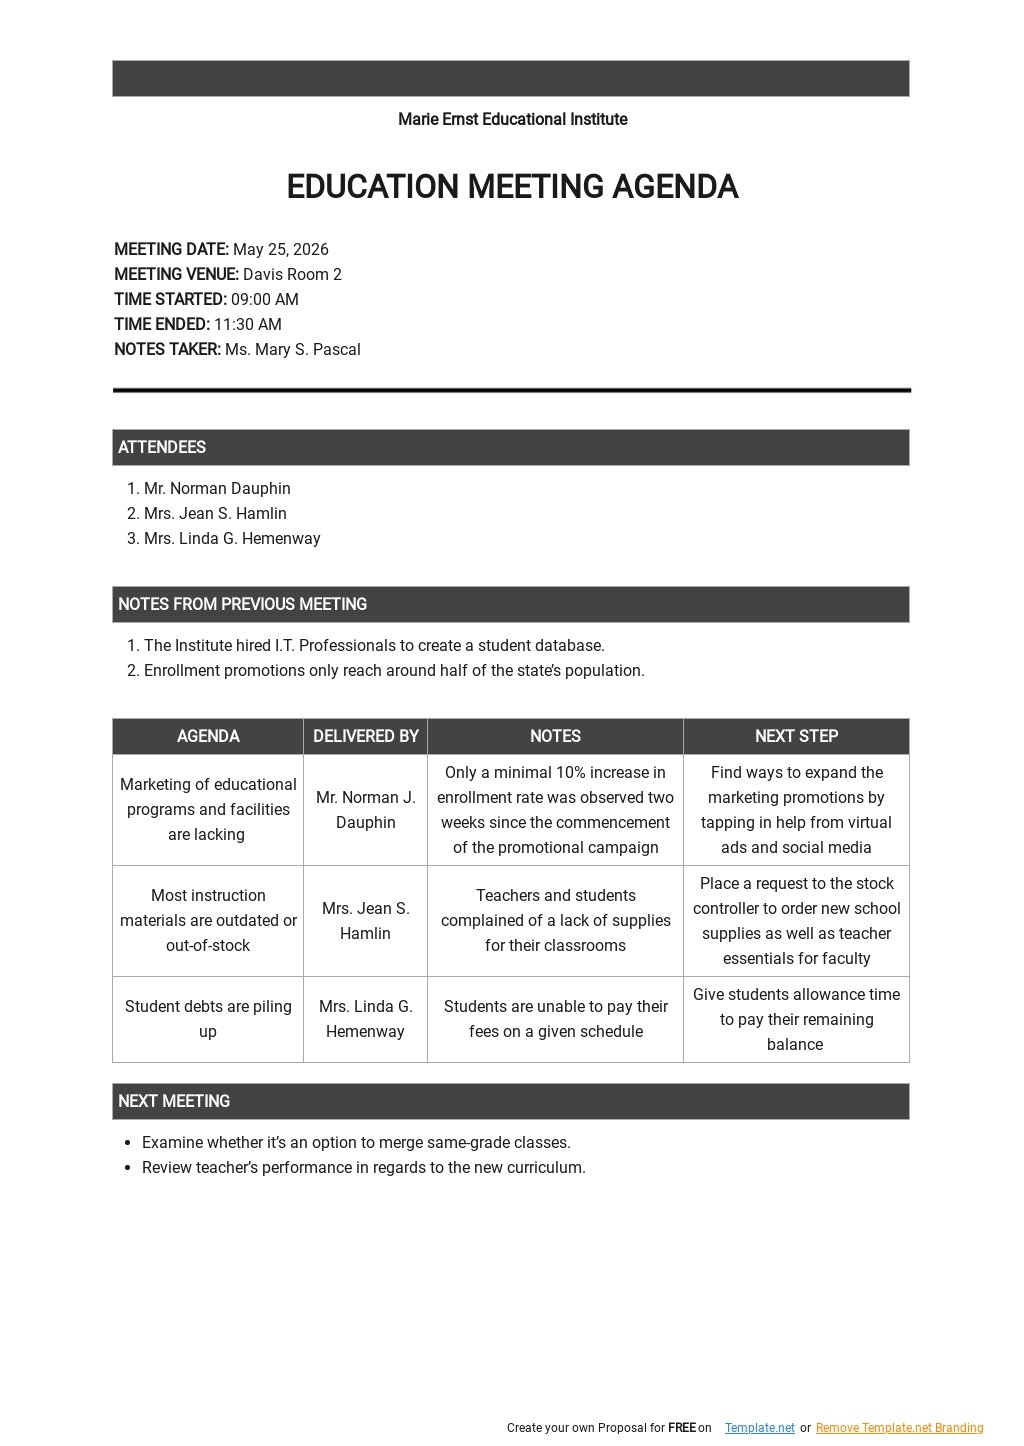 Education Meeting Agenda Template in Word, Google Docs, Apple Pages